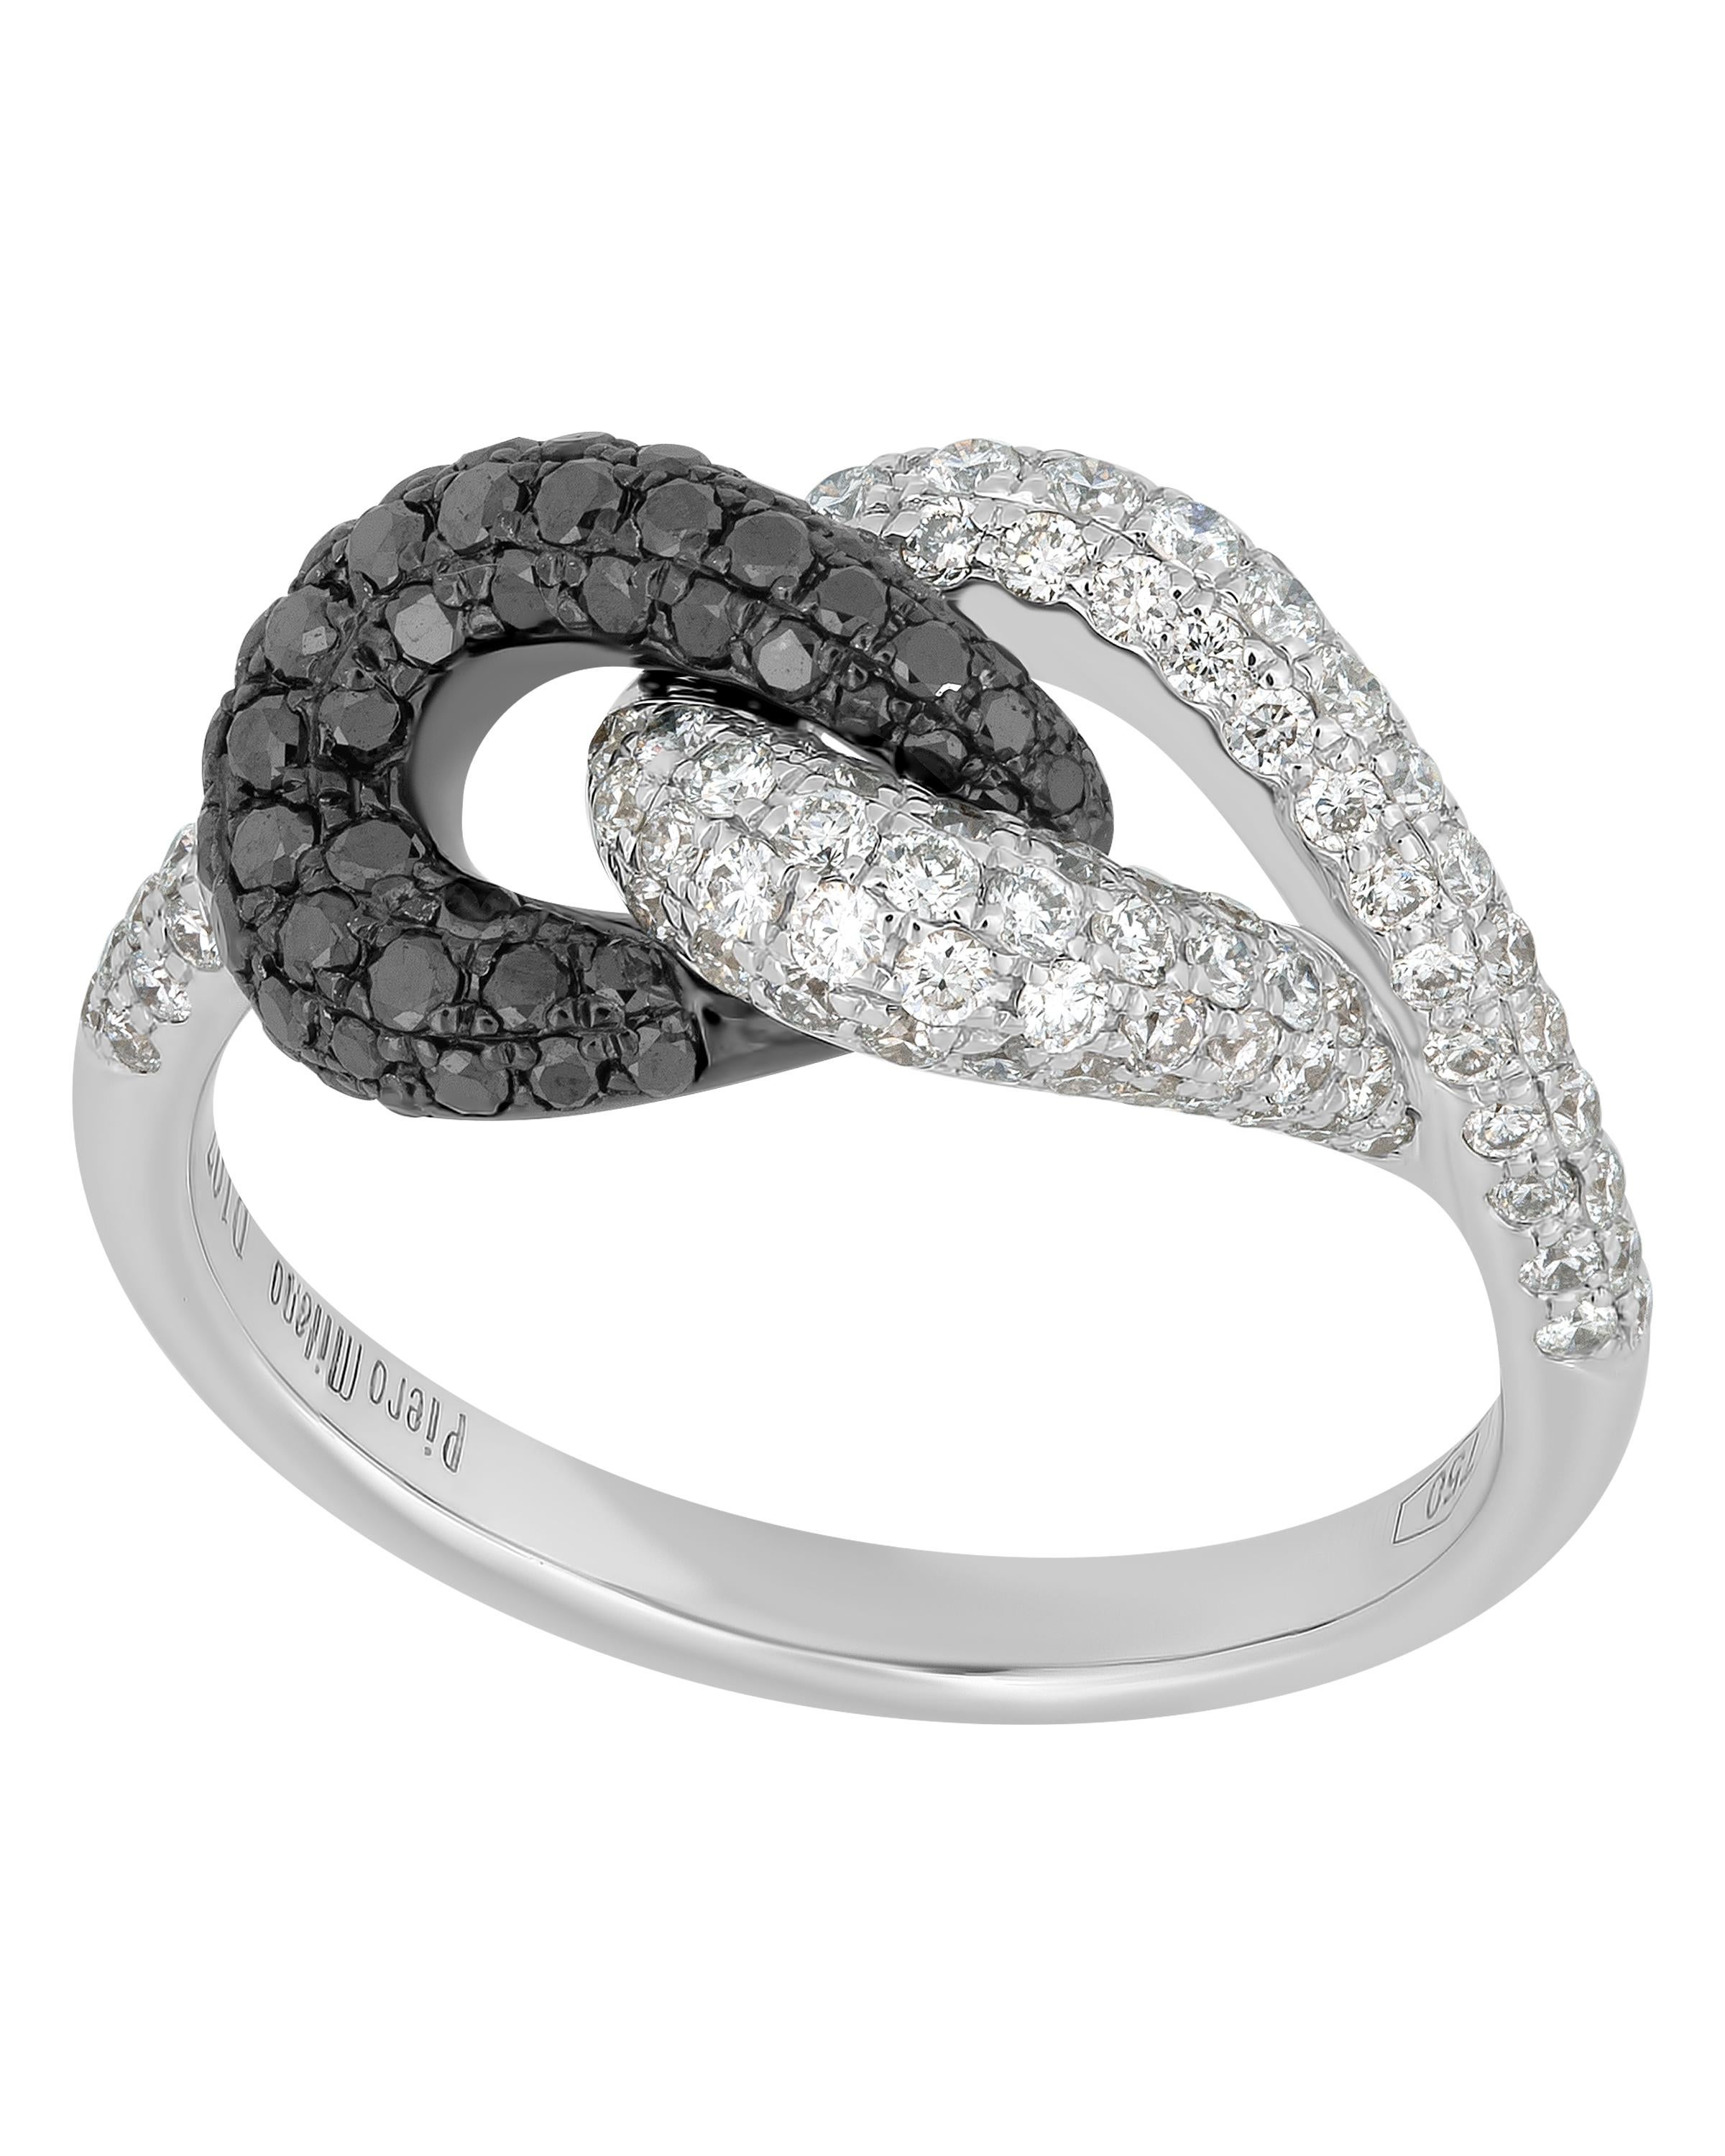 This contemporary Piero Milano 18K White Gold and 18K Black Gold Knot Ring features glittering white diamonds 0.62ct. tw. beautifully intertwined with a ring of black diamonds 0.45ct. tw. . The ring size is 7 (54.4). The Decoration Size is 9.6mm.